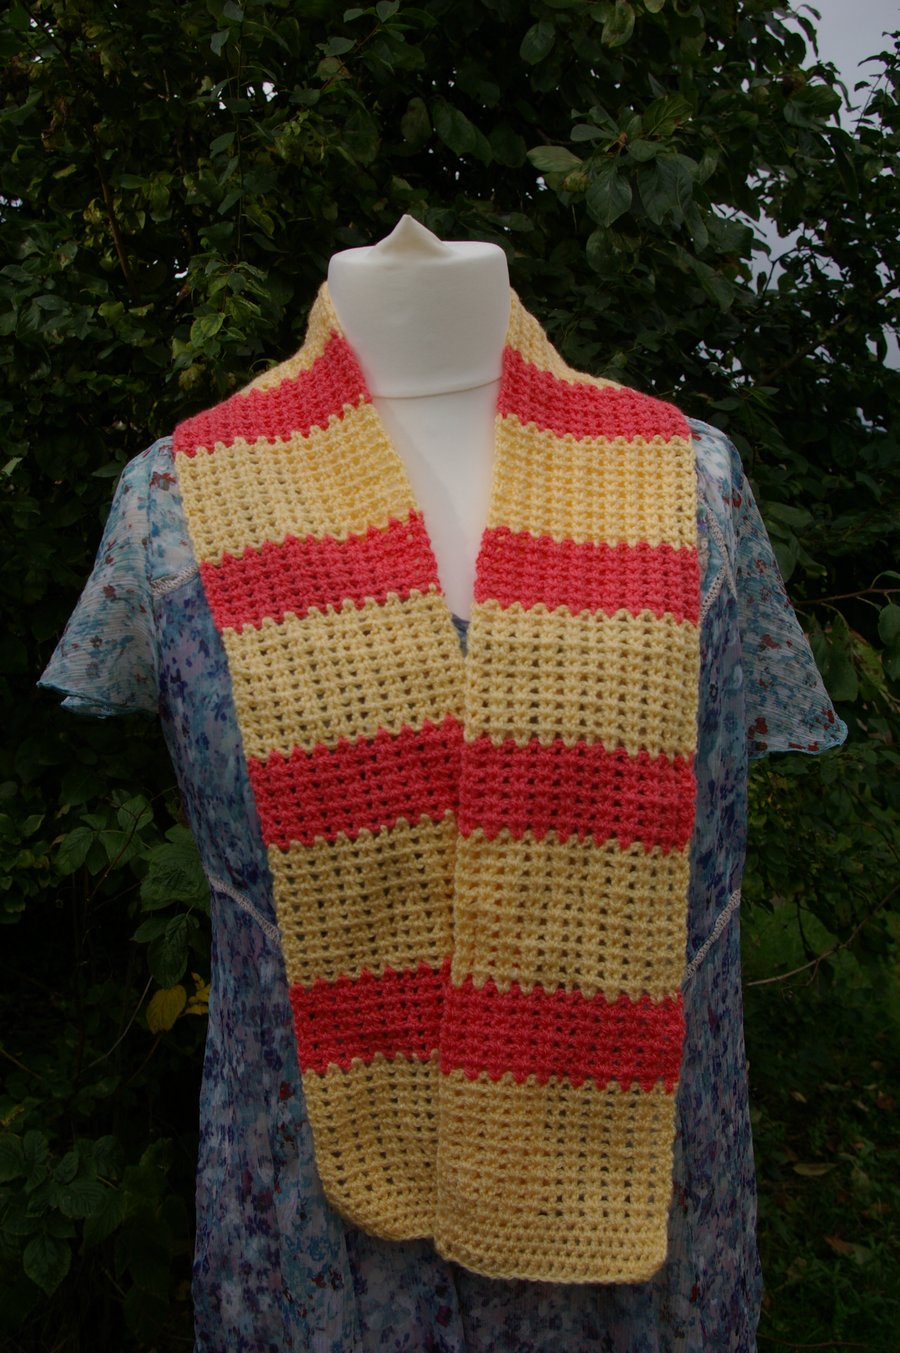 Striped Scarf crocheted in peach and yellow